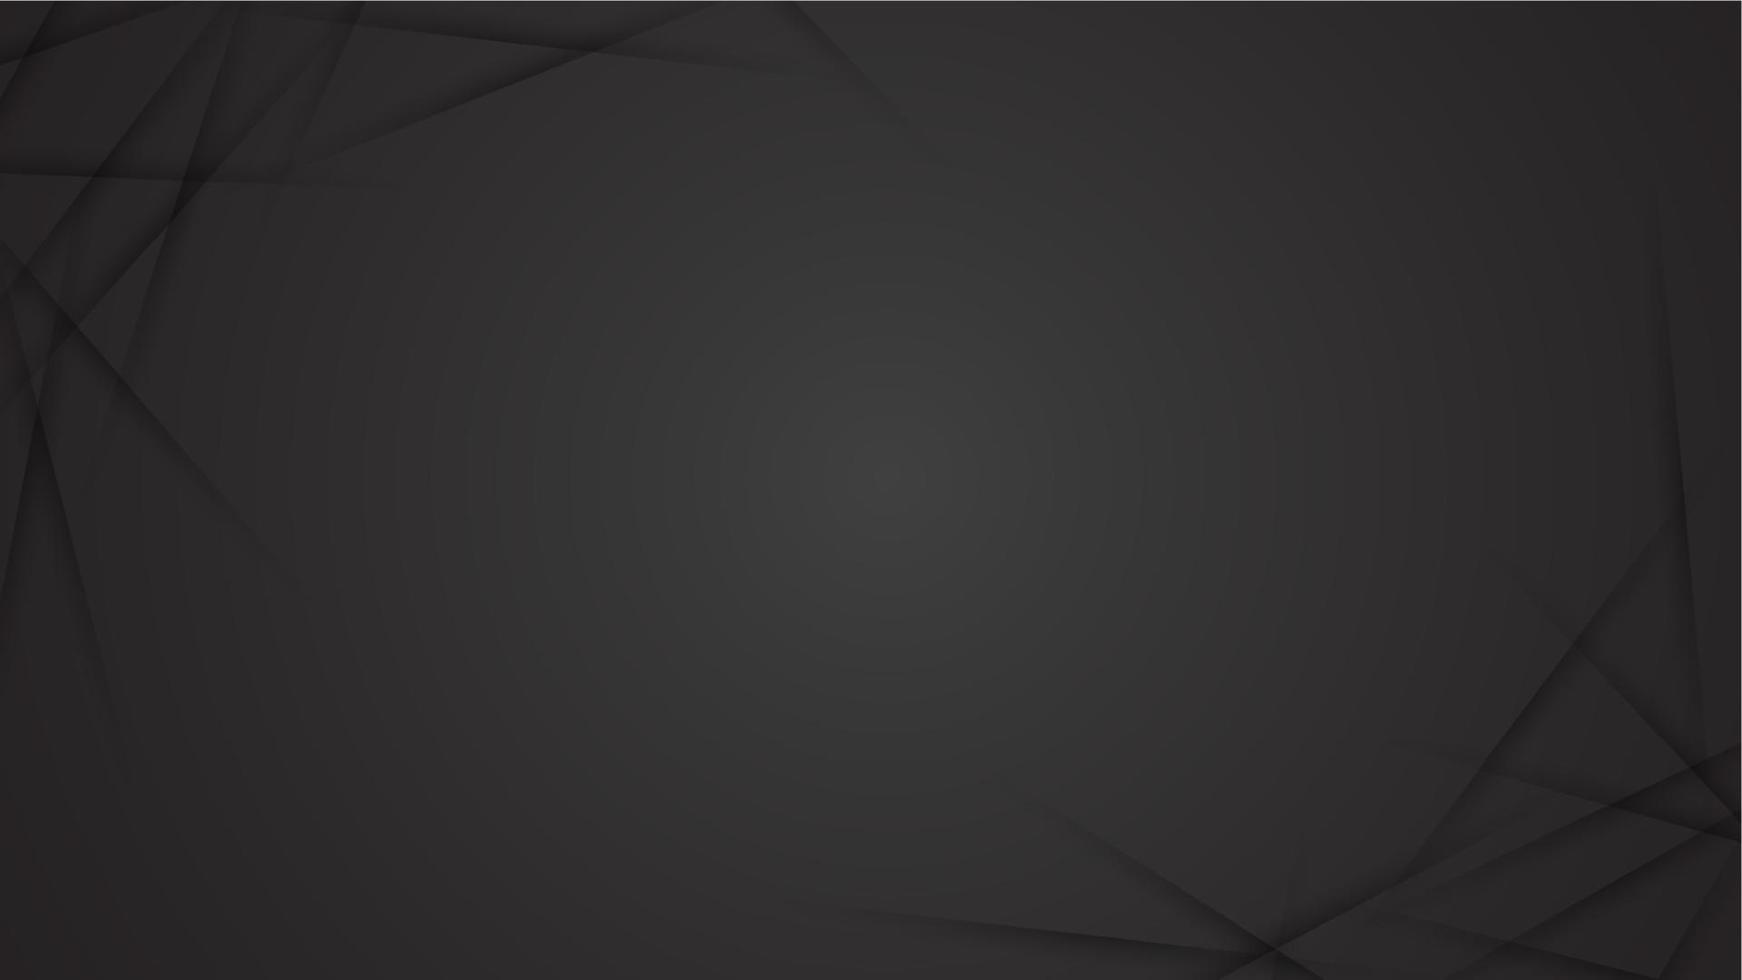 Black abstract background on 3d design vector